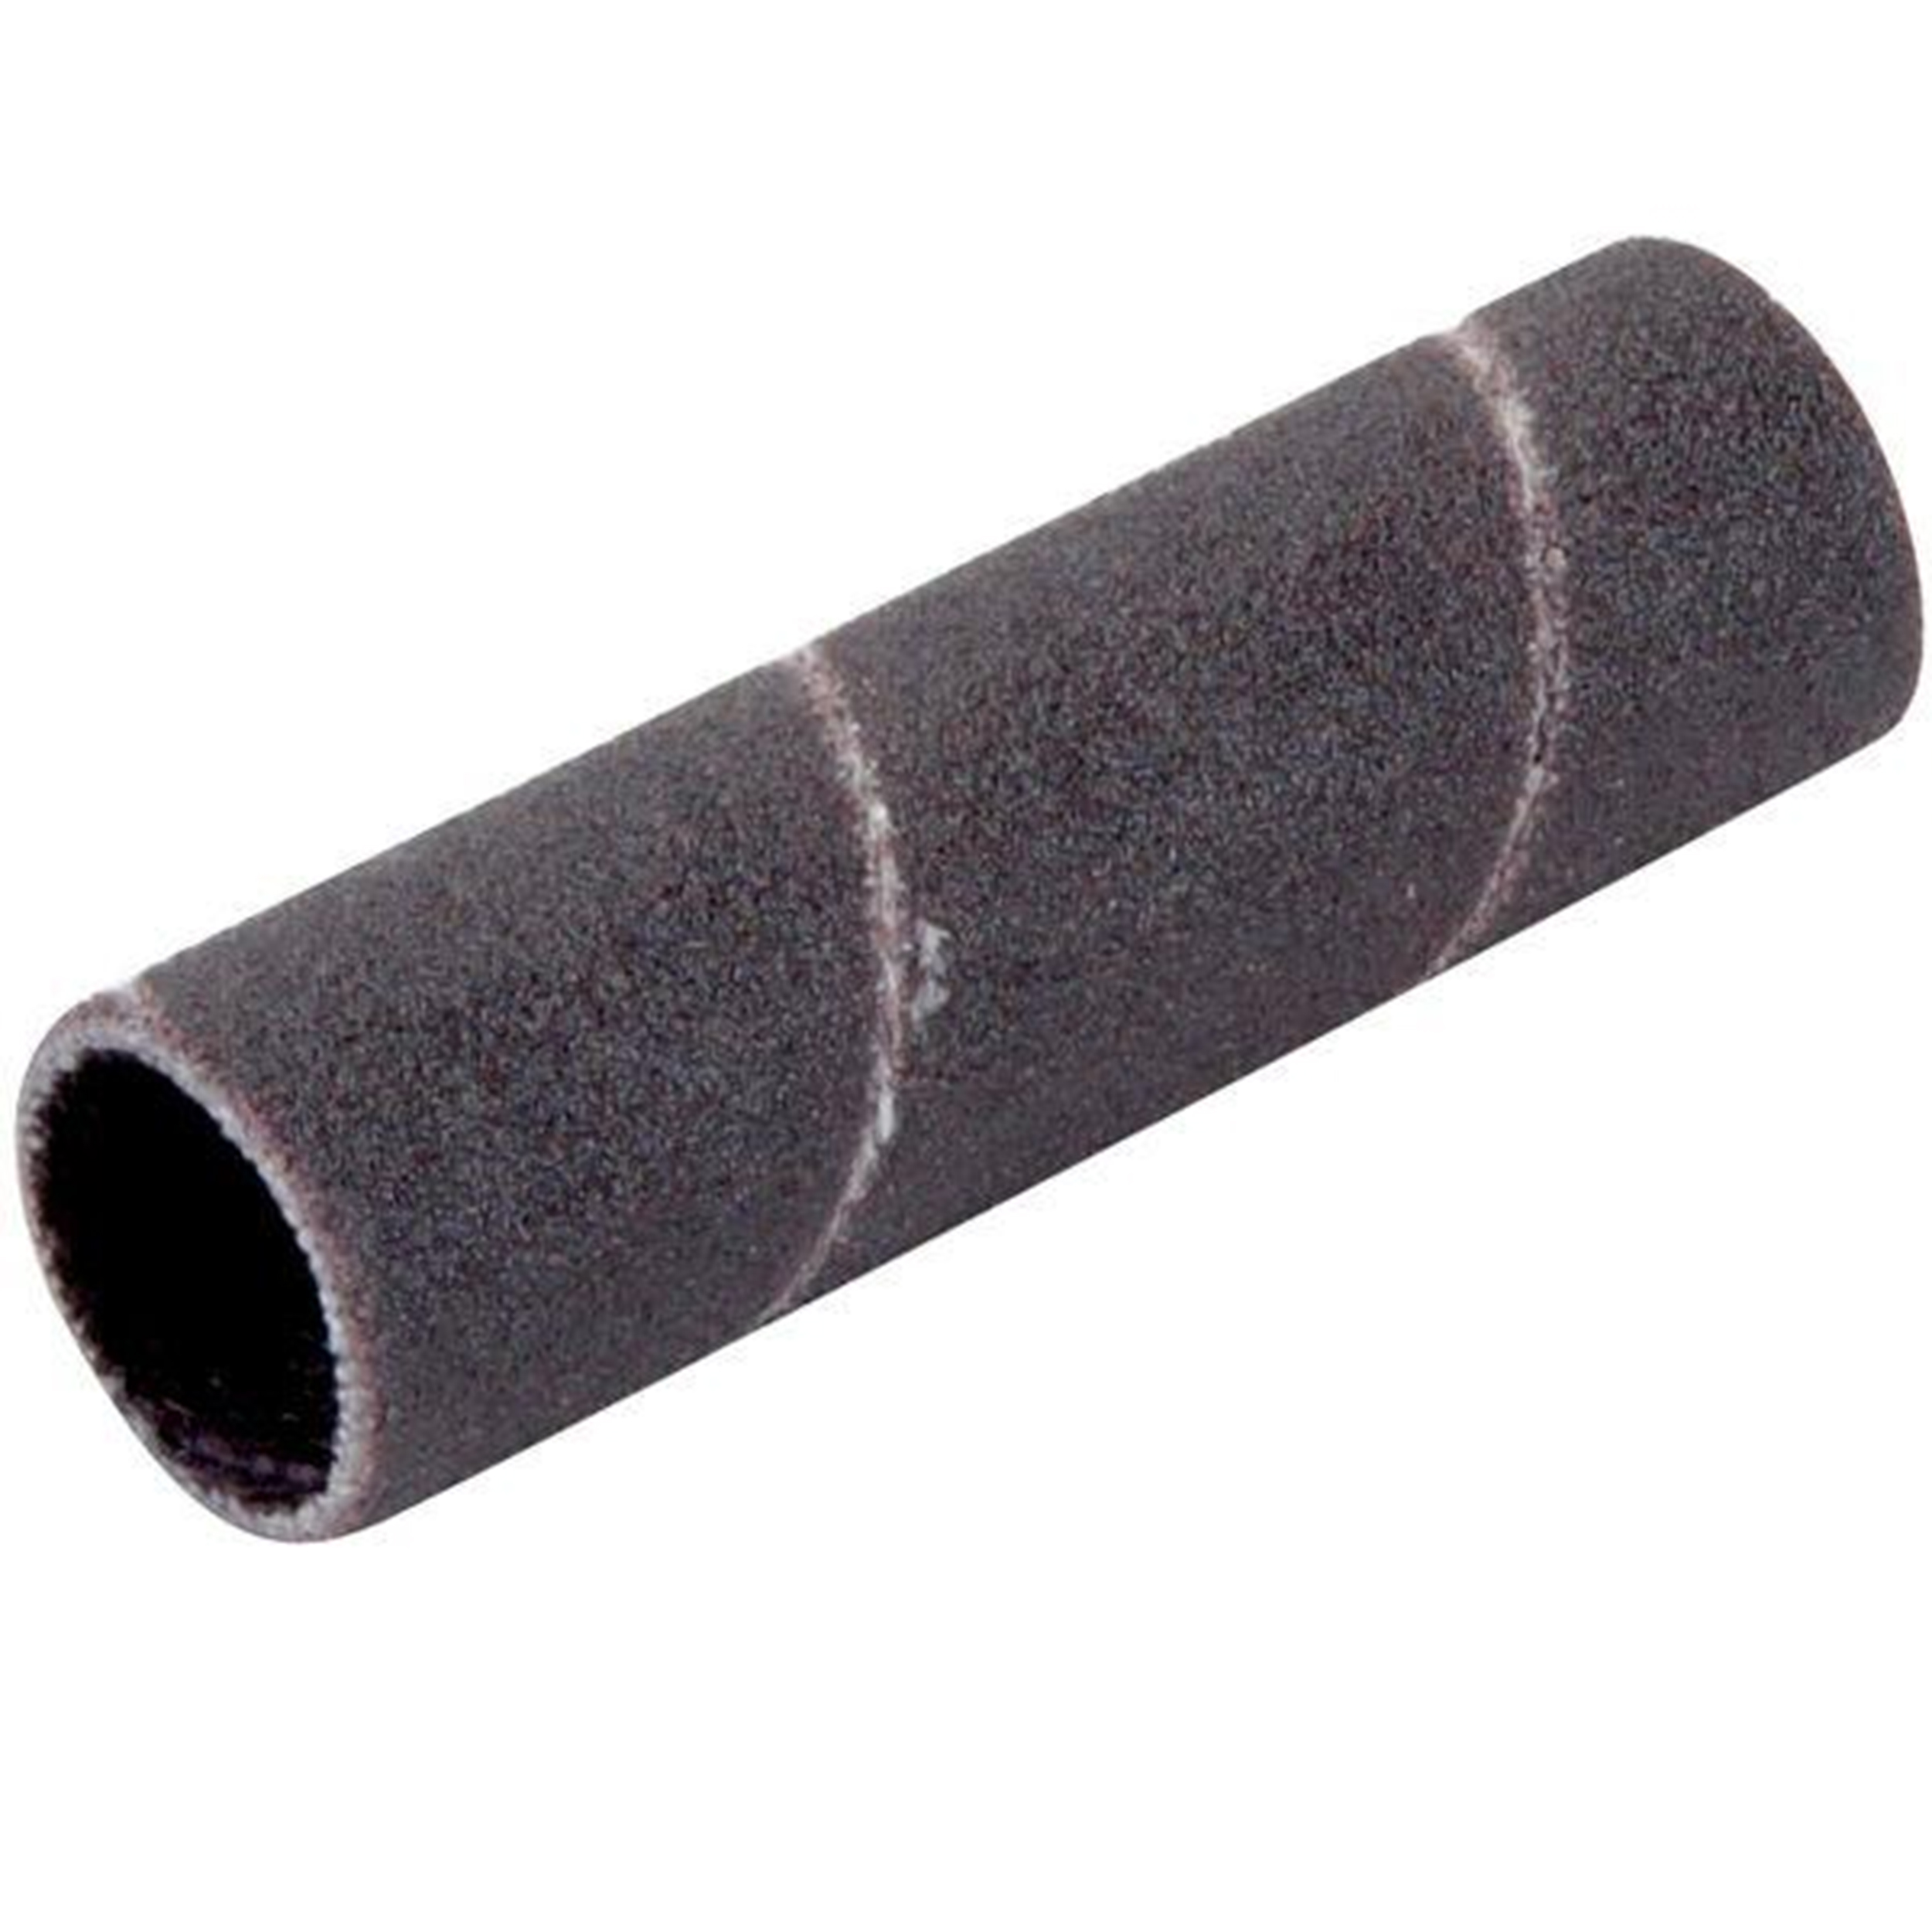 Sanding Drum Replacement Sleeve, 3/4" Dia. X 2" Length, 120 Grit, 12 Pack